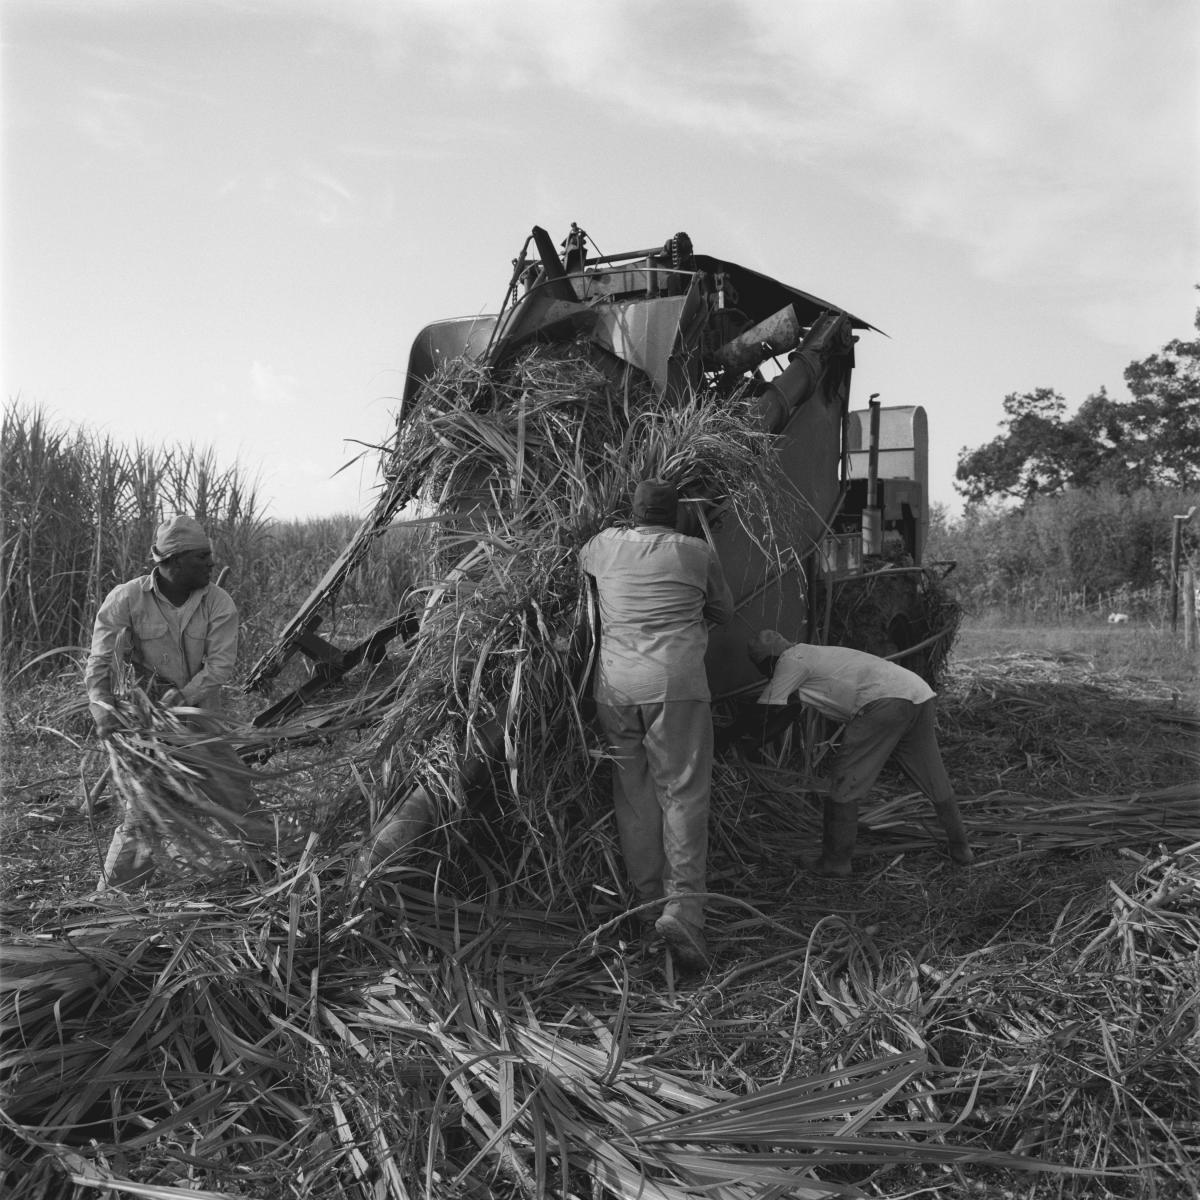 <p><center>Saint Mary Parish, Louisiana:</center></p>
Cleaveland Jackson ( center ) pulls sugar cane stalks from his old harvester with the help of his cousin and a neighbor. The decrepit machine frequently jams, which translates into time lost removing the sugarcane from the fields. : Images : AMERICAN BLACK FARMERS PROJECT - John Ficara